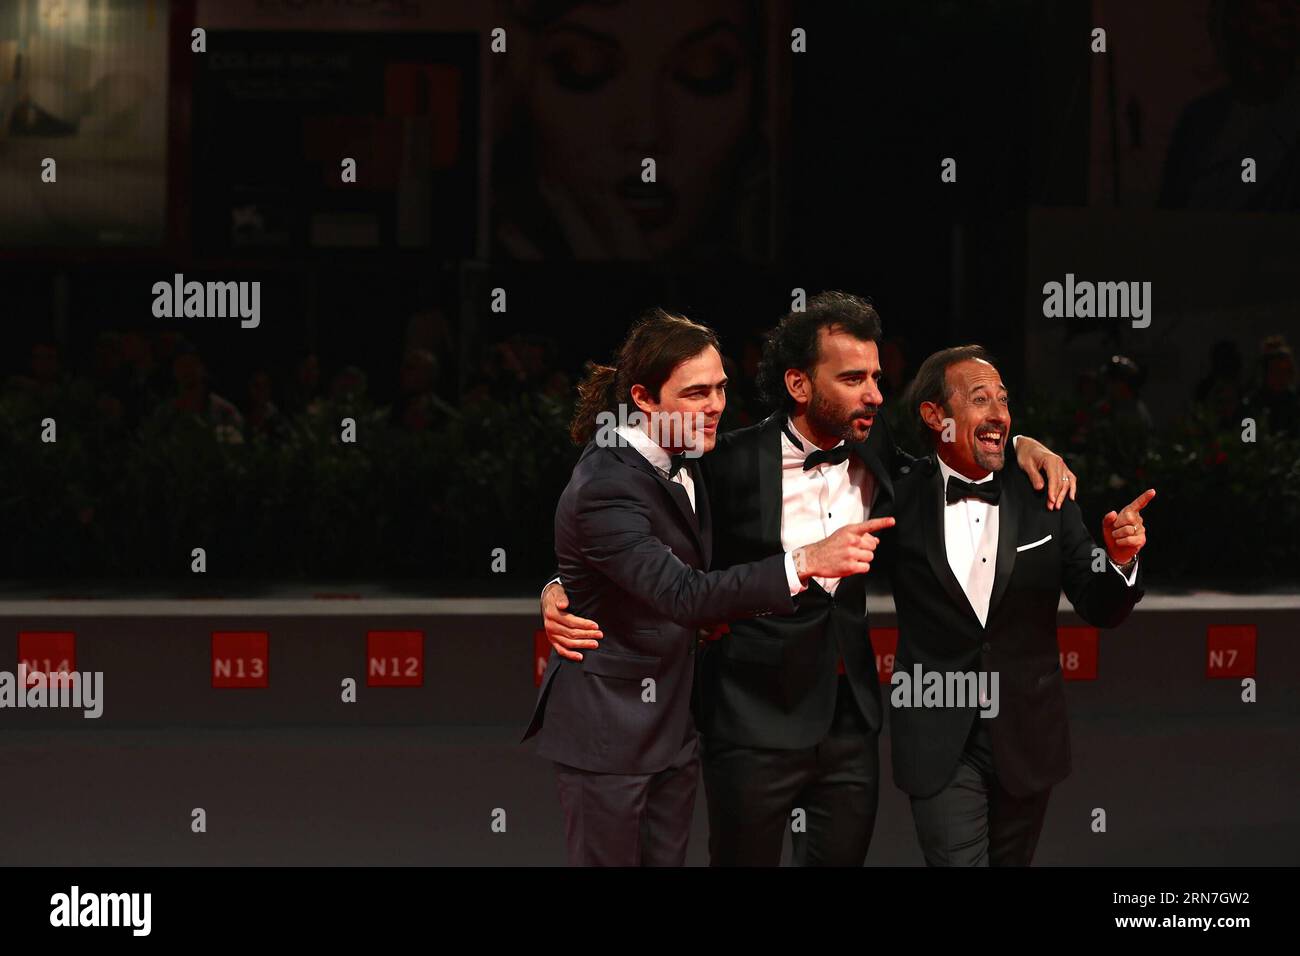 (150906) -- VENICE, Sept. 6, 2015 -- Actor Peter Lanzani (L), Director Pablo (C) and actor Guillermo Francella attend a premiere for El Clan during the 72nd Venice Film Festival in Venice, Italy, on Sept. 6, 2015. ) ITALY-VENICE-FILM-FESTIVAL-72ND-EL CLAN-PREMIERE JinxYu PUBLICATIONxNOTxINxCHN   150906 Venice Sept 6 2015 Actor Peter Lanzani l Director Pablo C and Actor Guillermo Francella attend a Premiere for El Clan during The 72nd Venice Film Festival in Venice Italy ON Sept 6 2015 Italy Venice Film Festival 72nd El Clan Premiere JinxYu PUBLICATIONxNOTxINxCHN Stock Photo